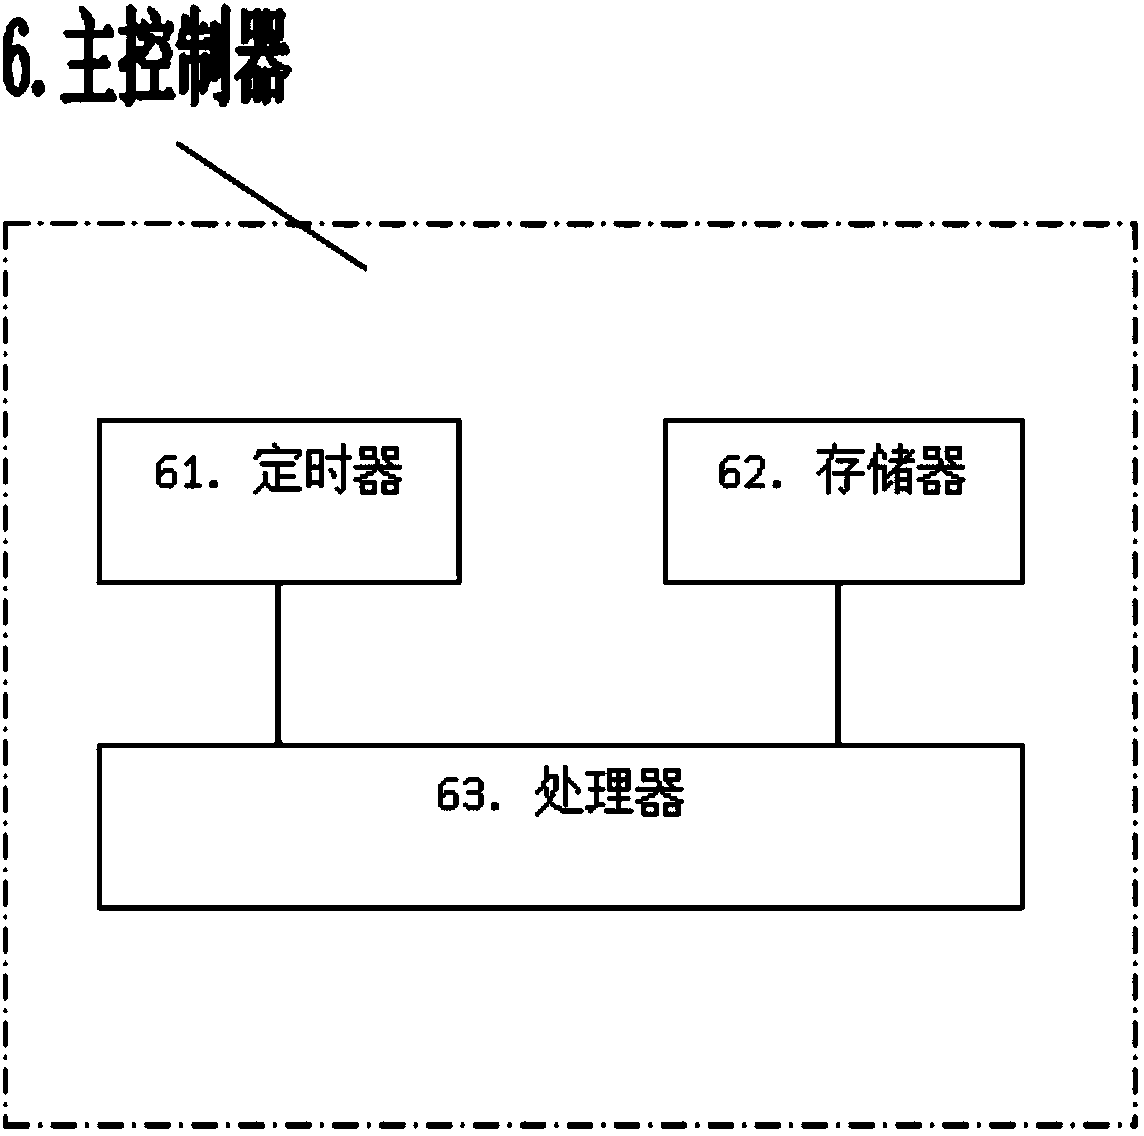 Refrigerator monitoring device based on refrigerator door opening/closing states and humidity detection